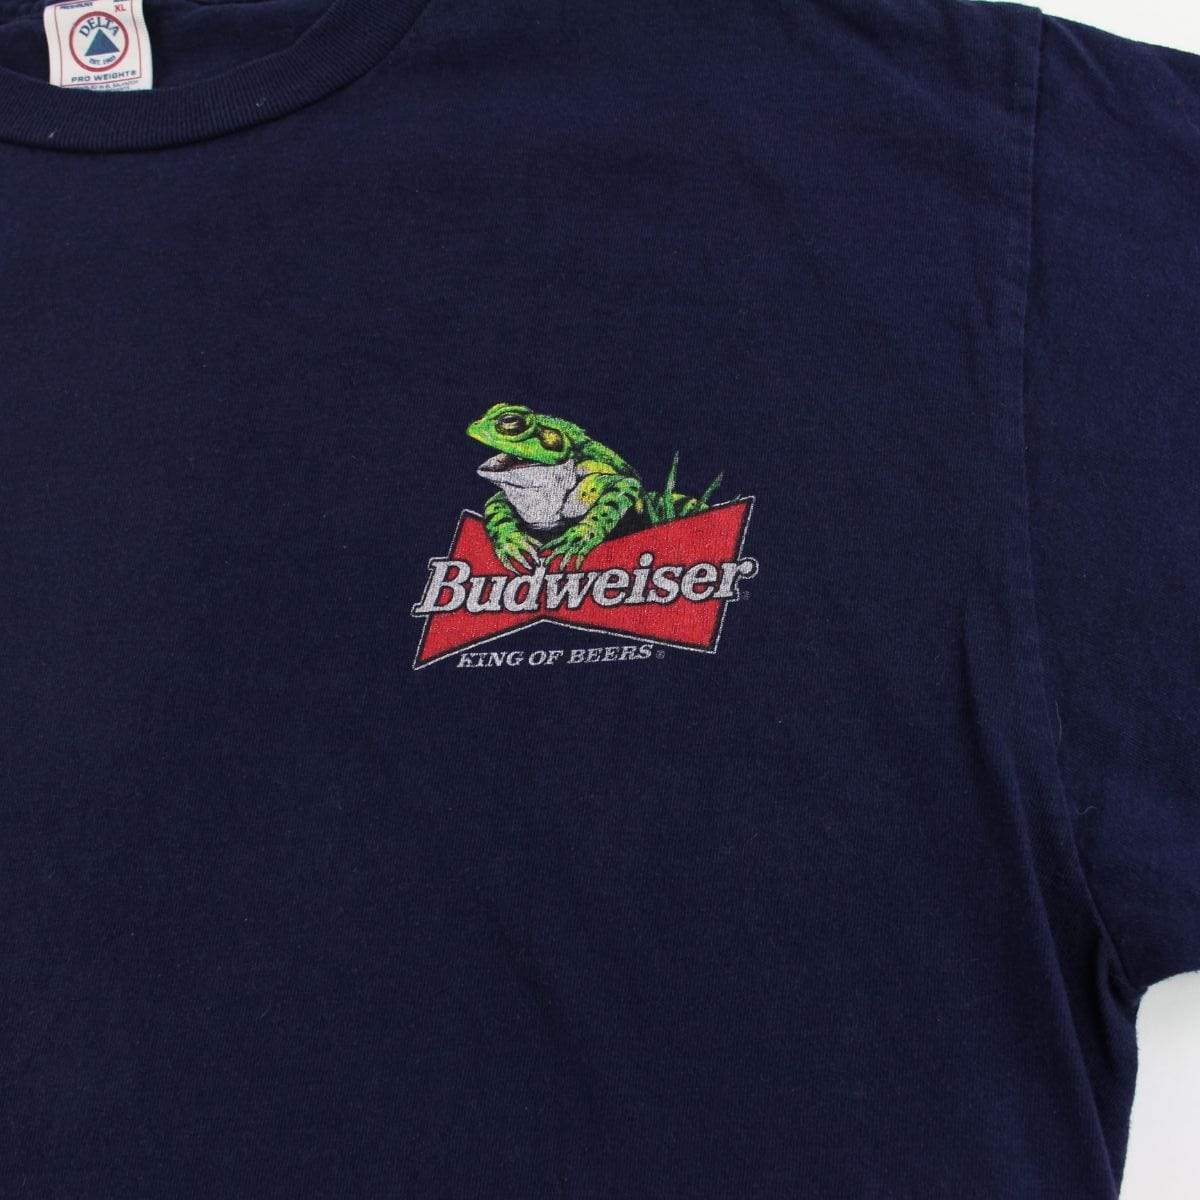 Budweiser This Buds For You Tee Navy - SaruGeneral